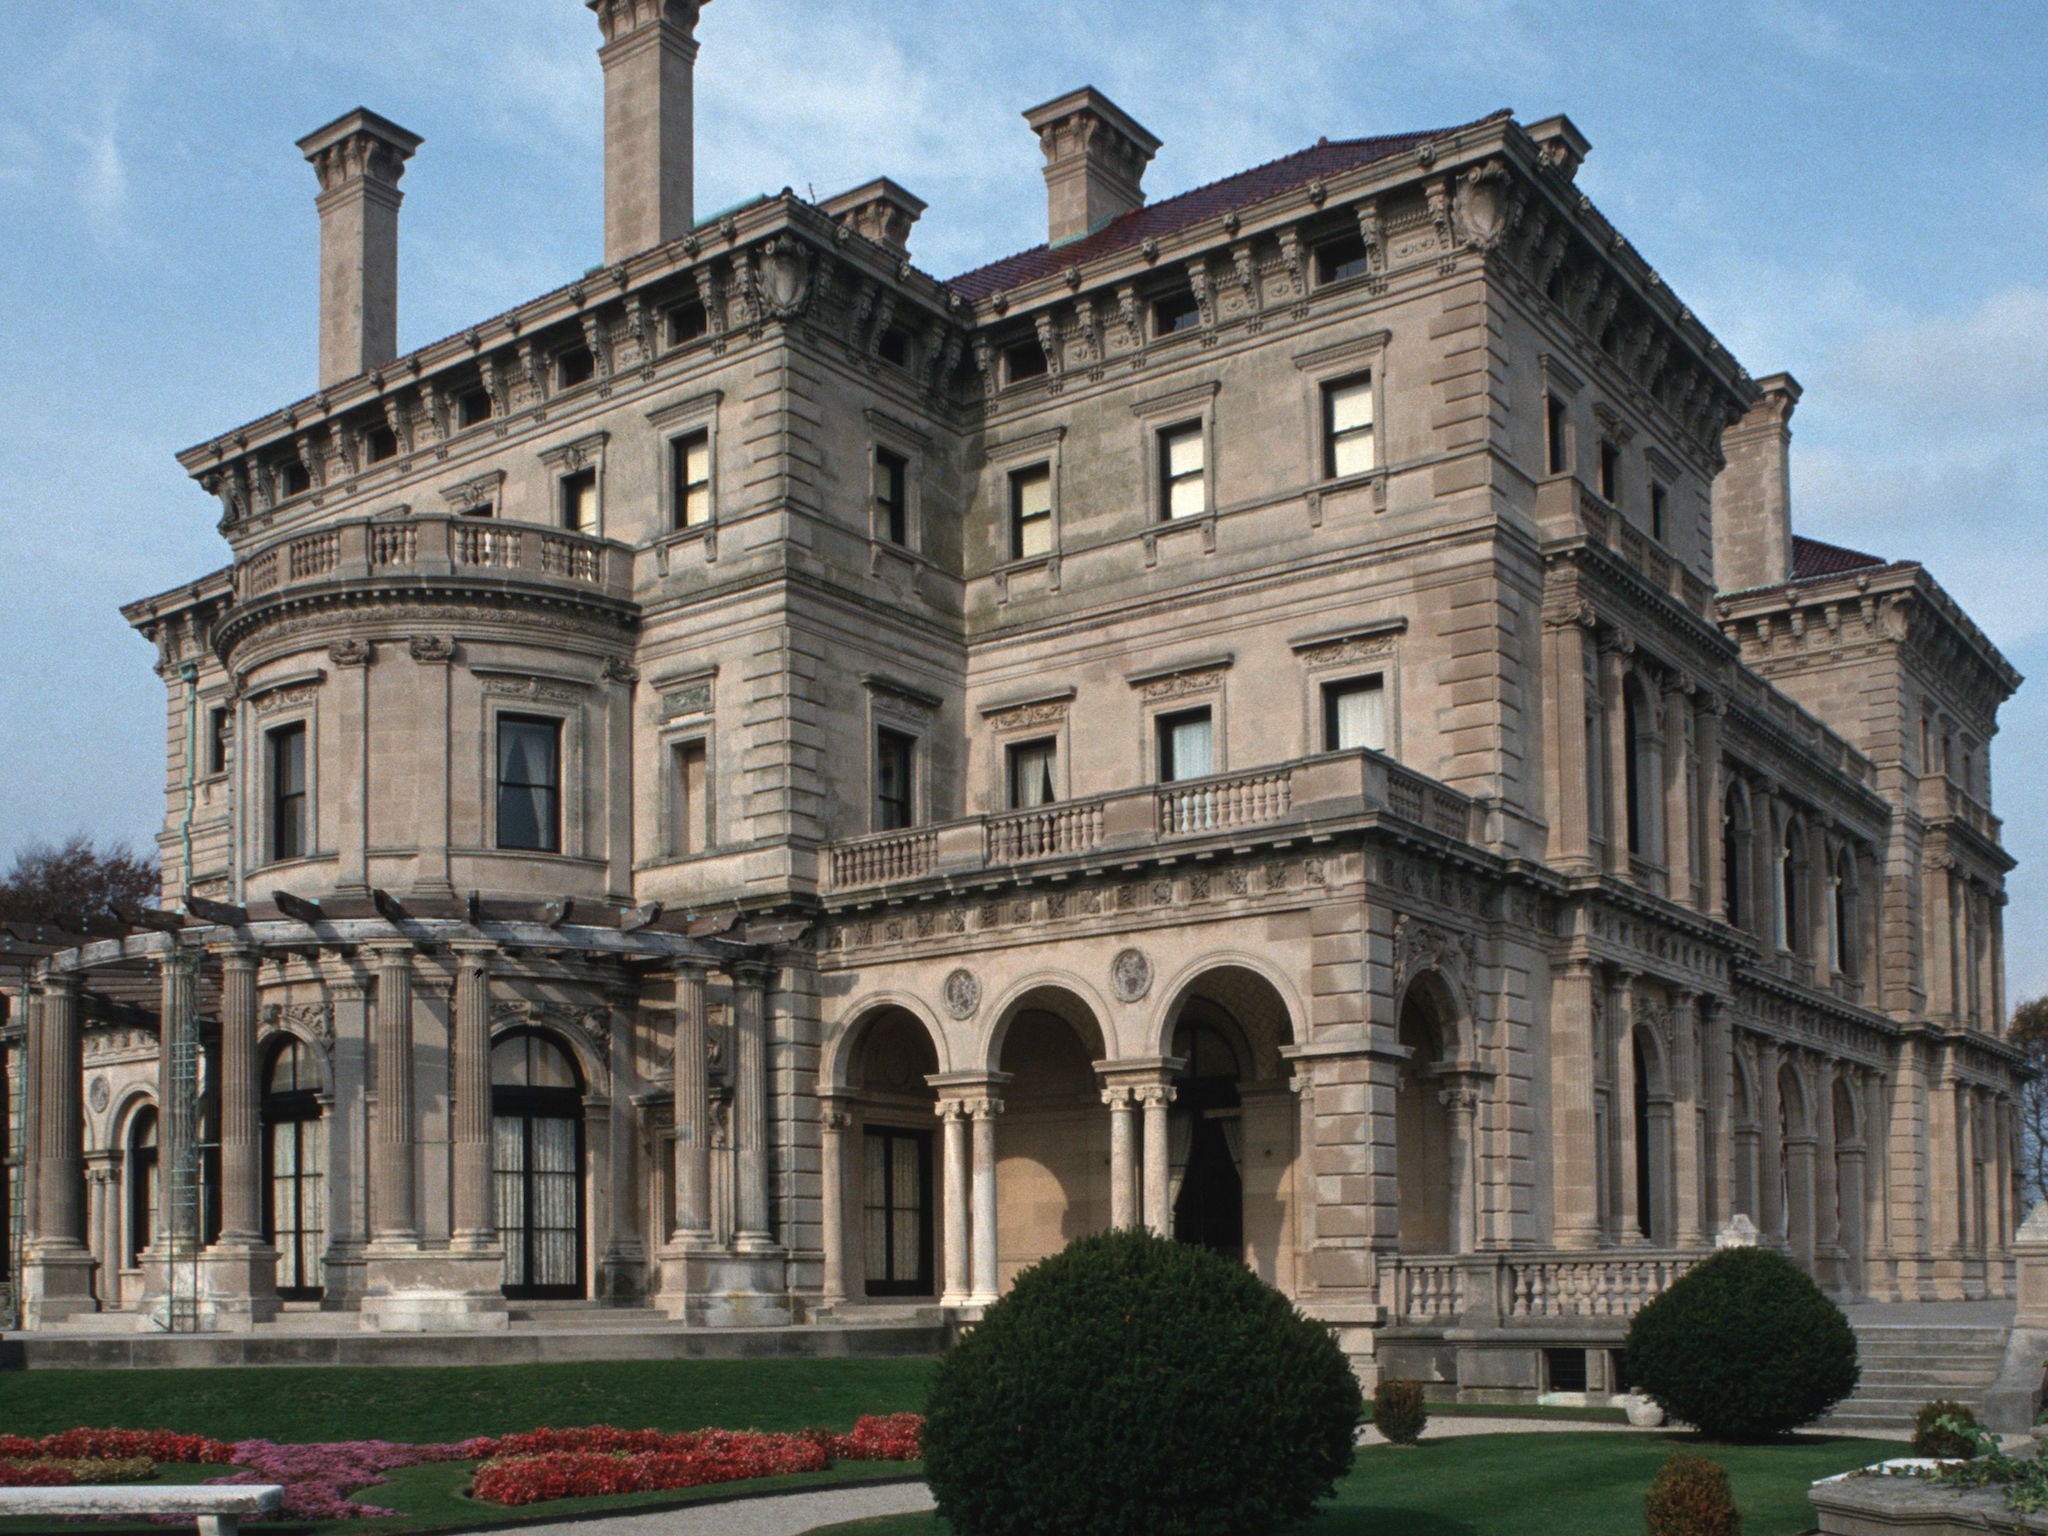 For 100 years, The Breakers mansion was home to the Vanderbilt family